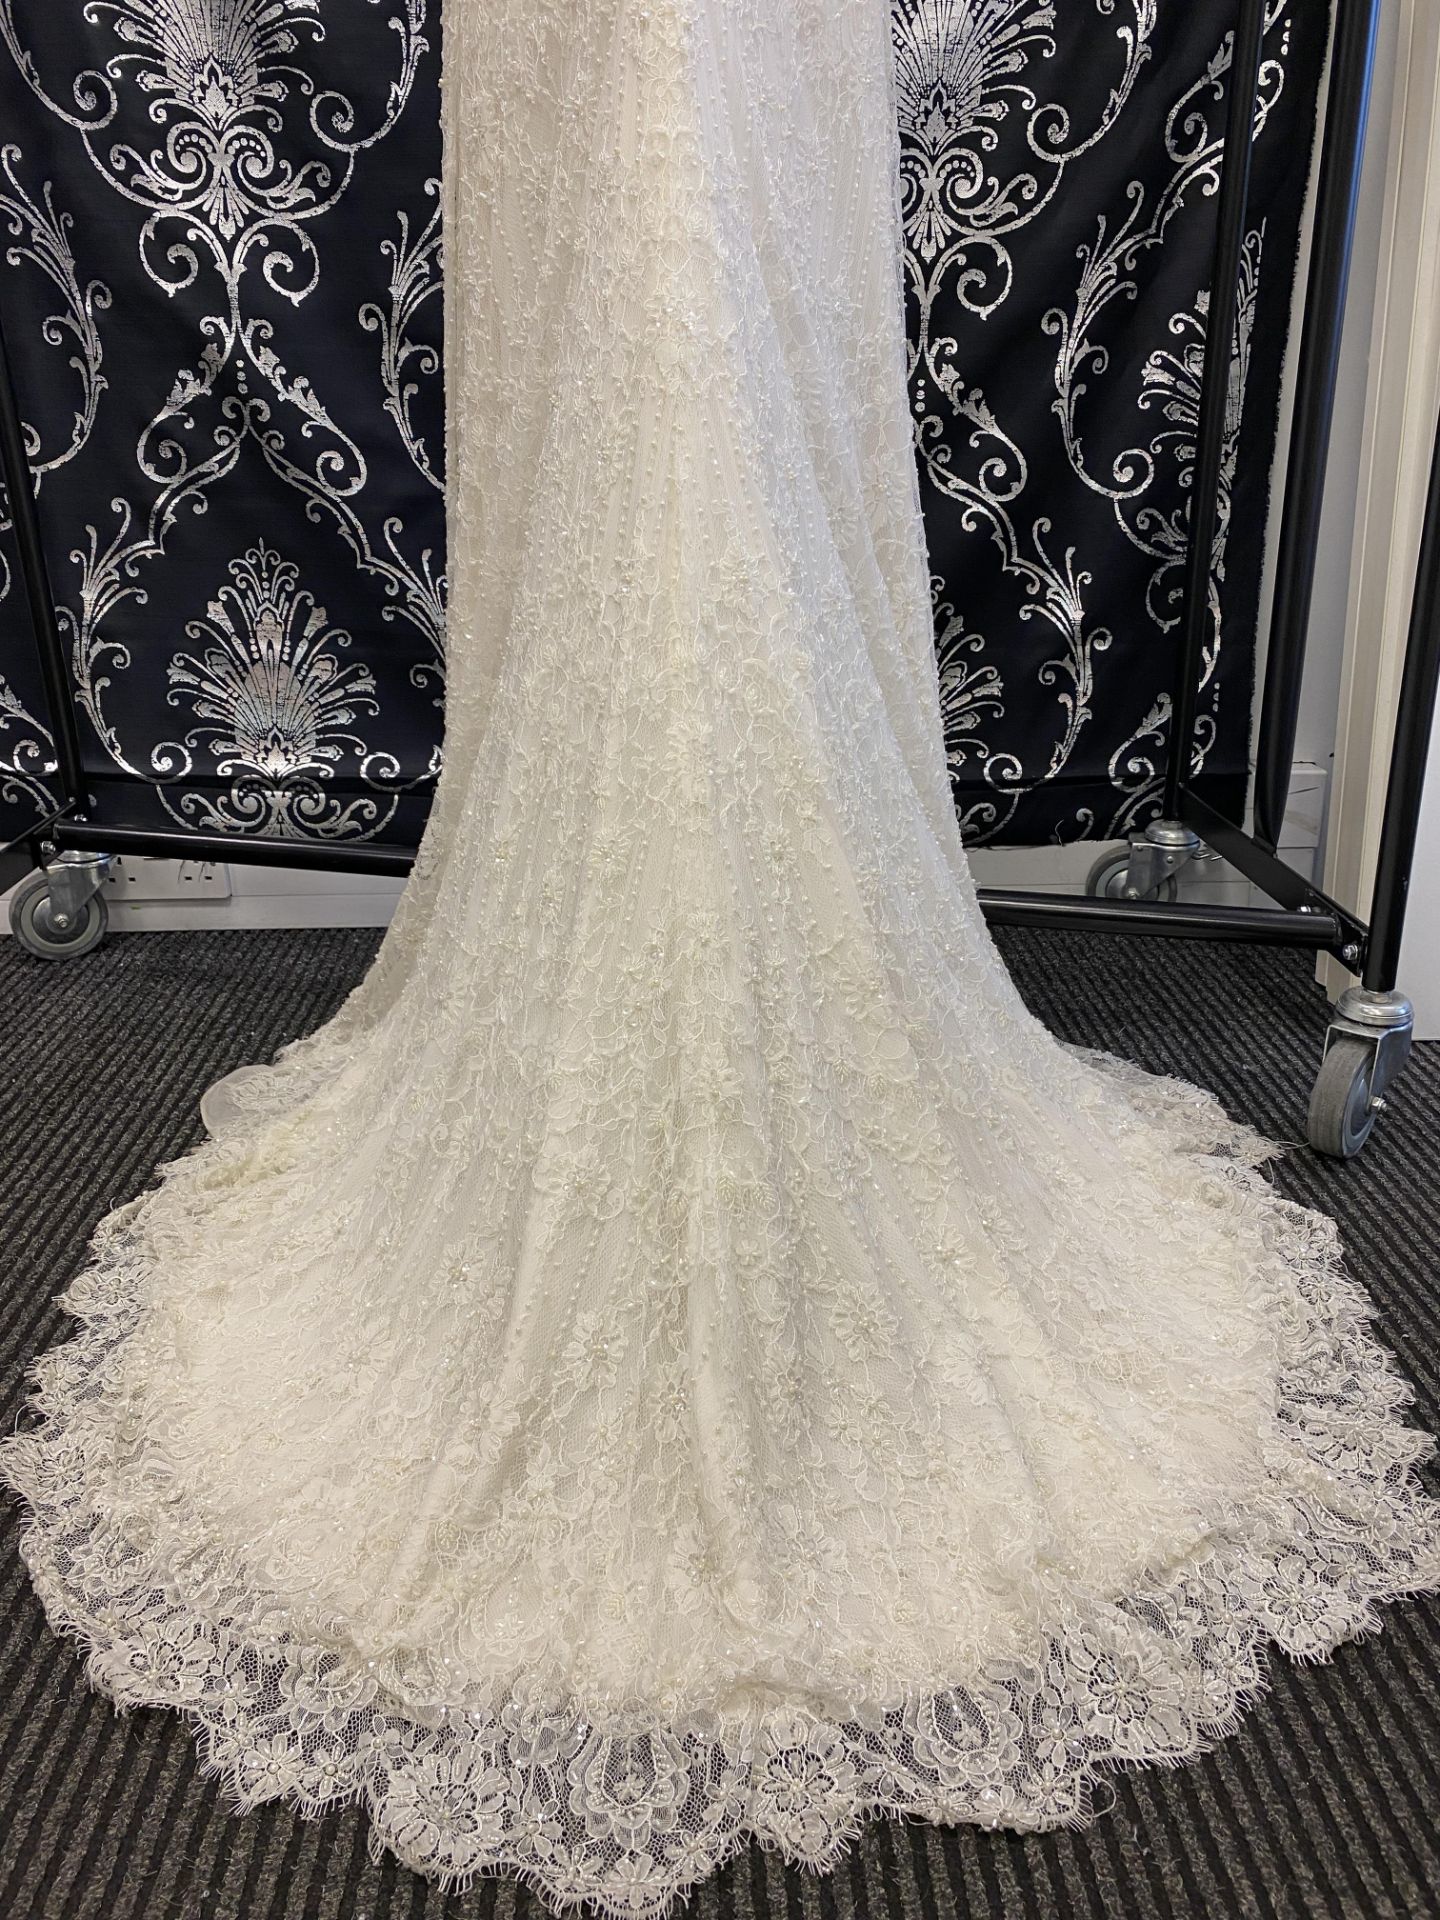 1 x LUSAN MANDONGUS Lace And Beaded Designer Wedding Dress Bridal Gown RRP £1,200 UK 12 - Image 6 of 12